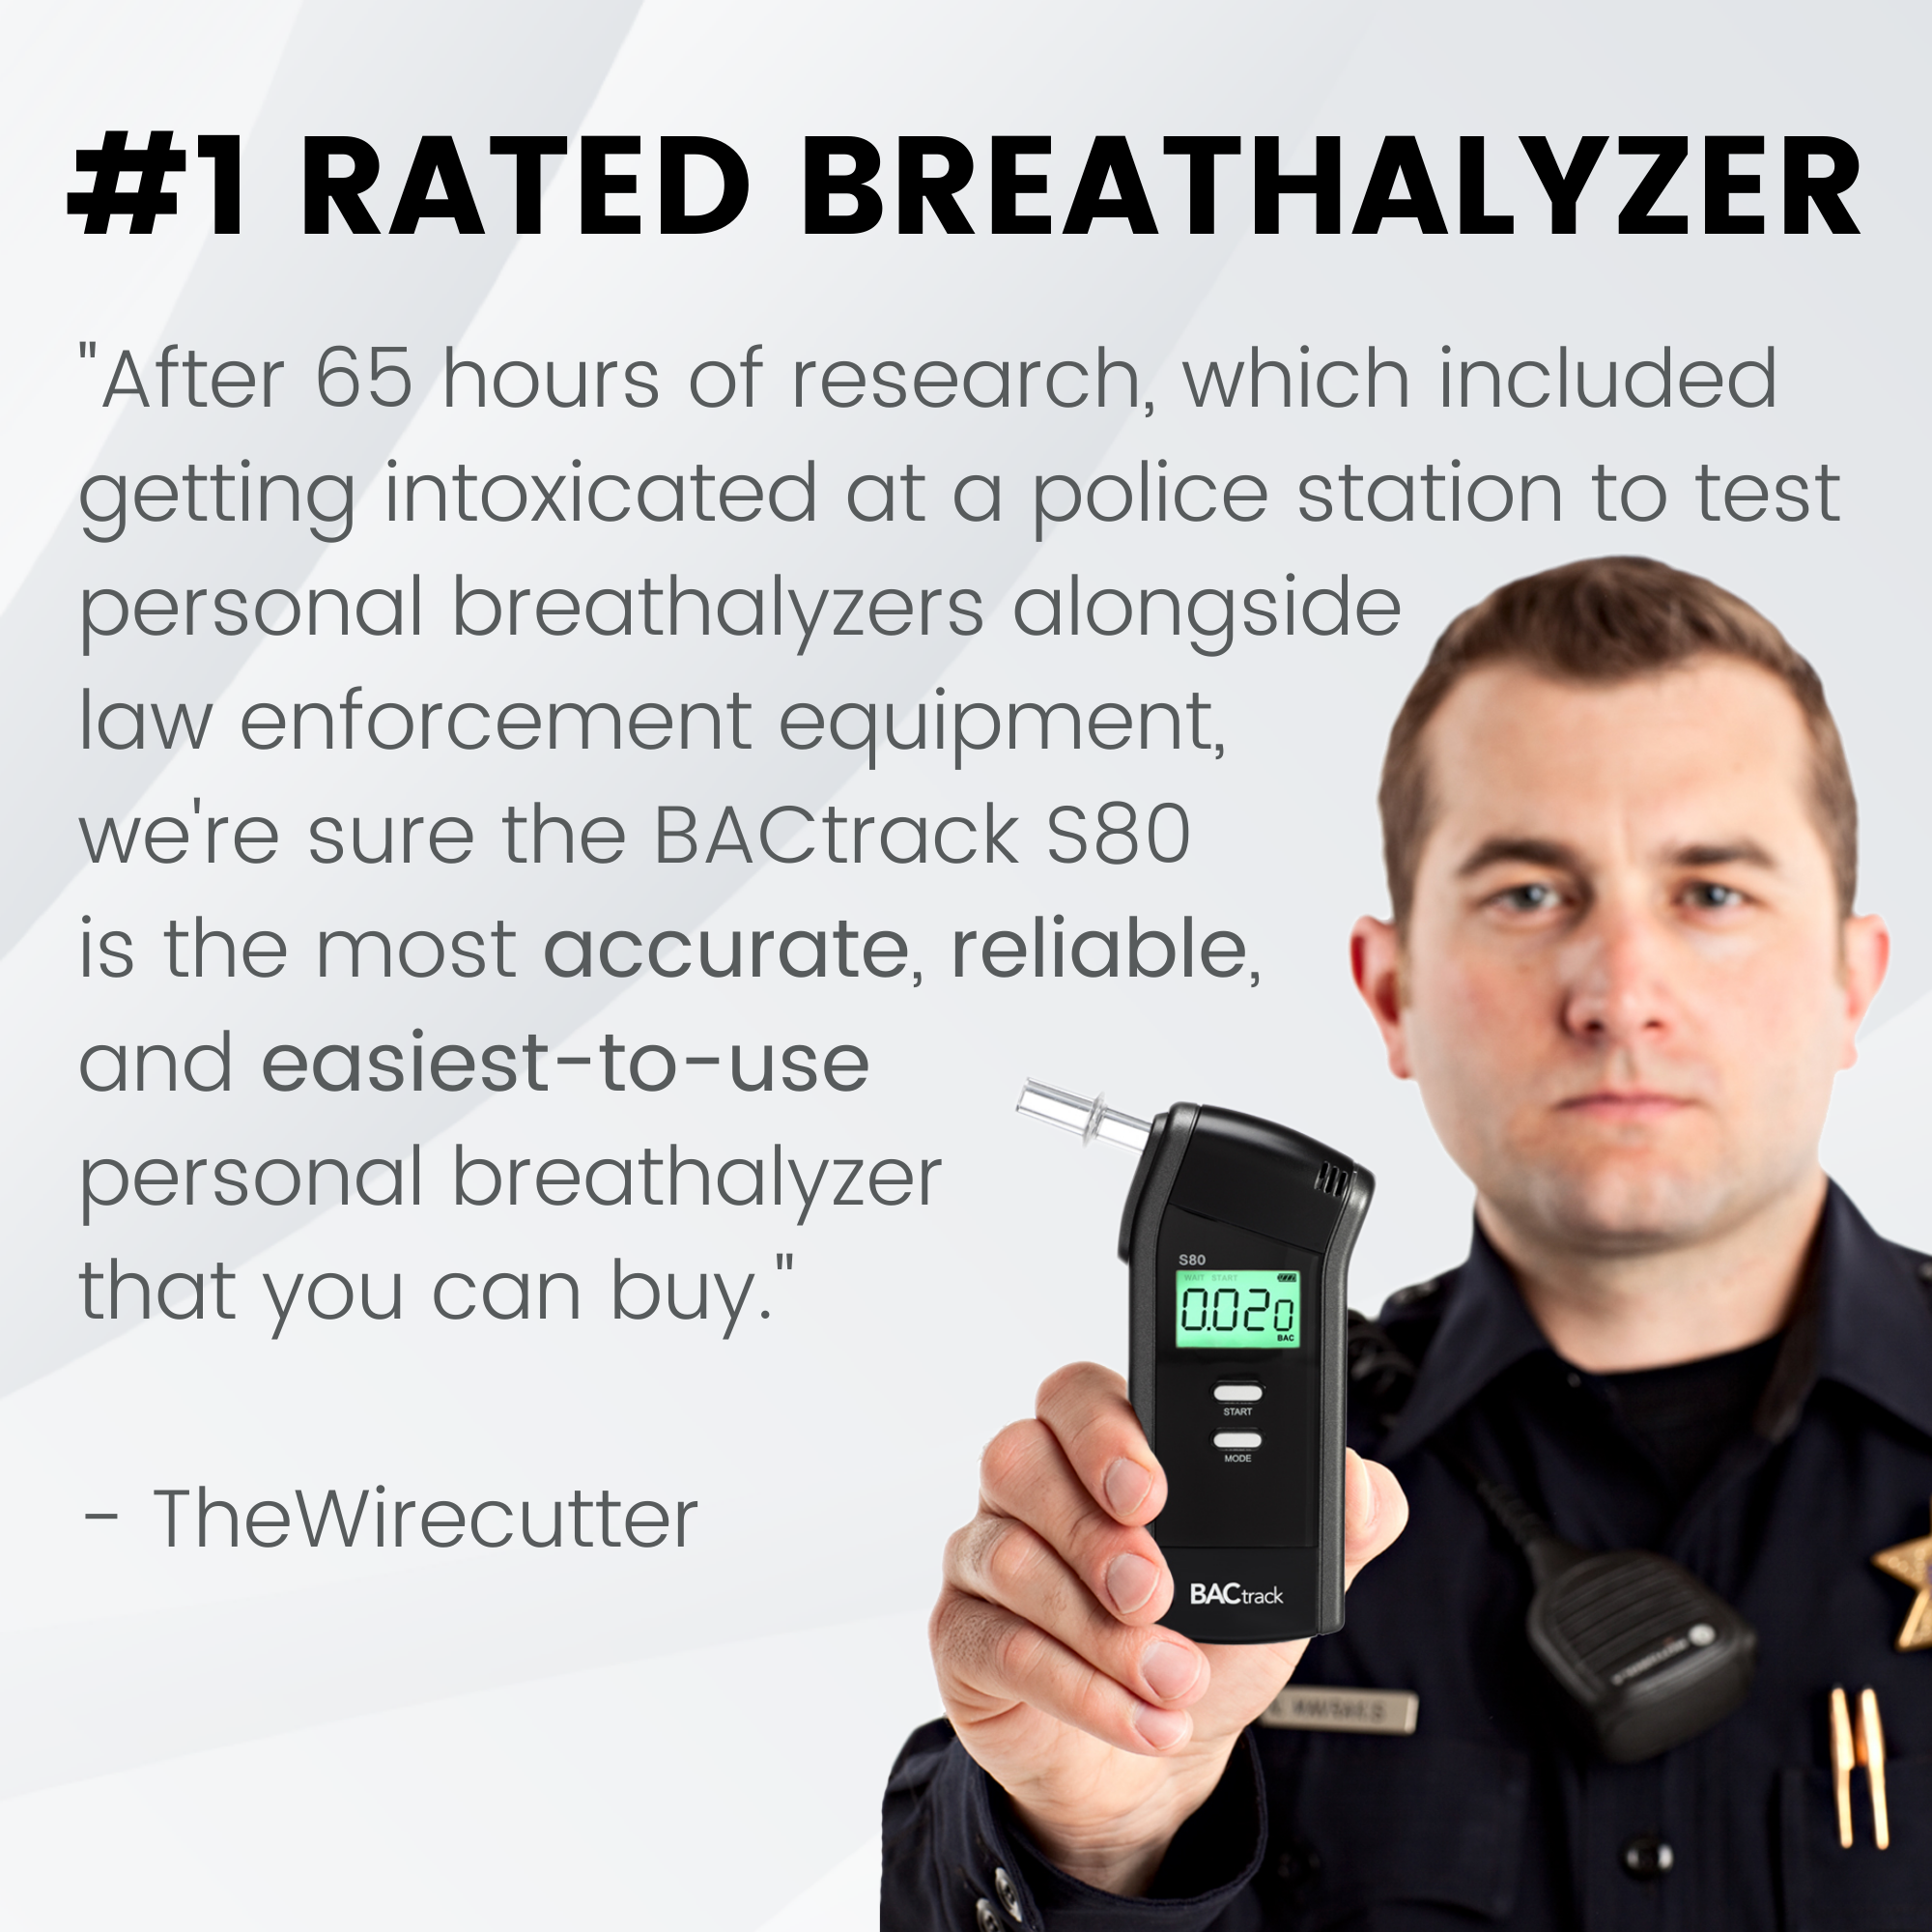 BACtrack S80 Breathalyzer | Professional-Grade Accuracy | DOT & NHTSA Approved | FDA 510(k) Cleared | Portable Breath Alcohol Tester for Personal & Professional Use - image 3 of 10